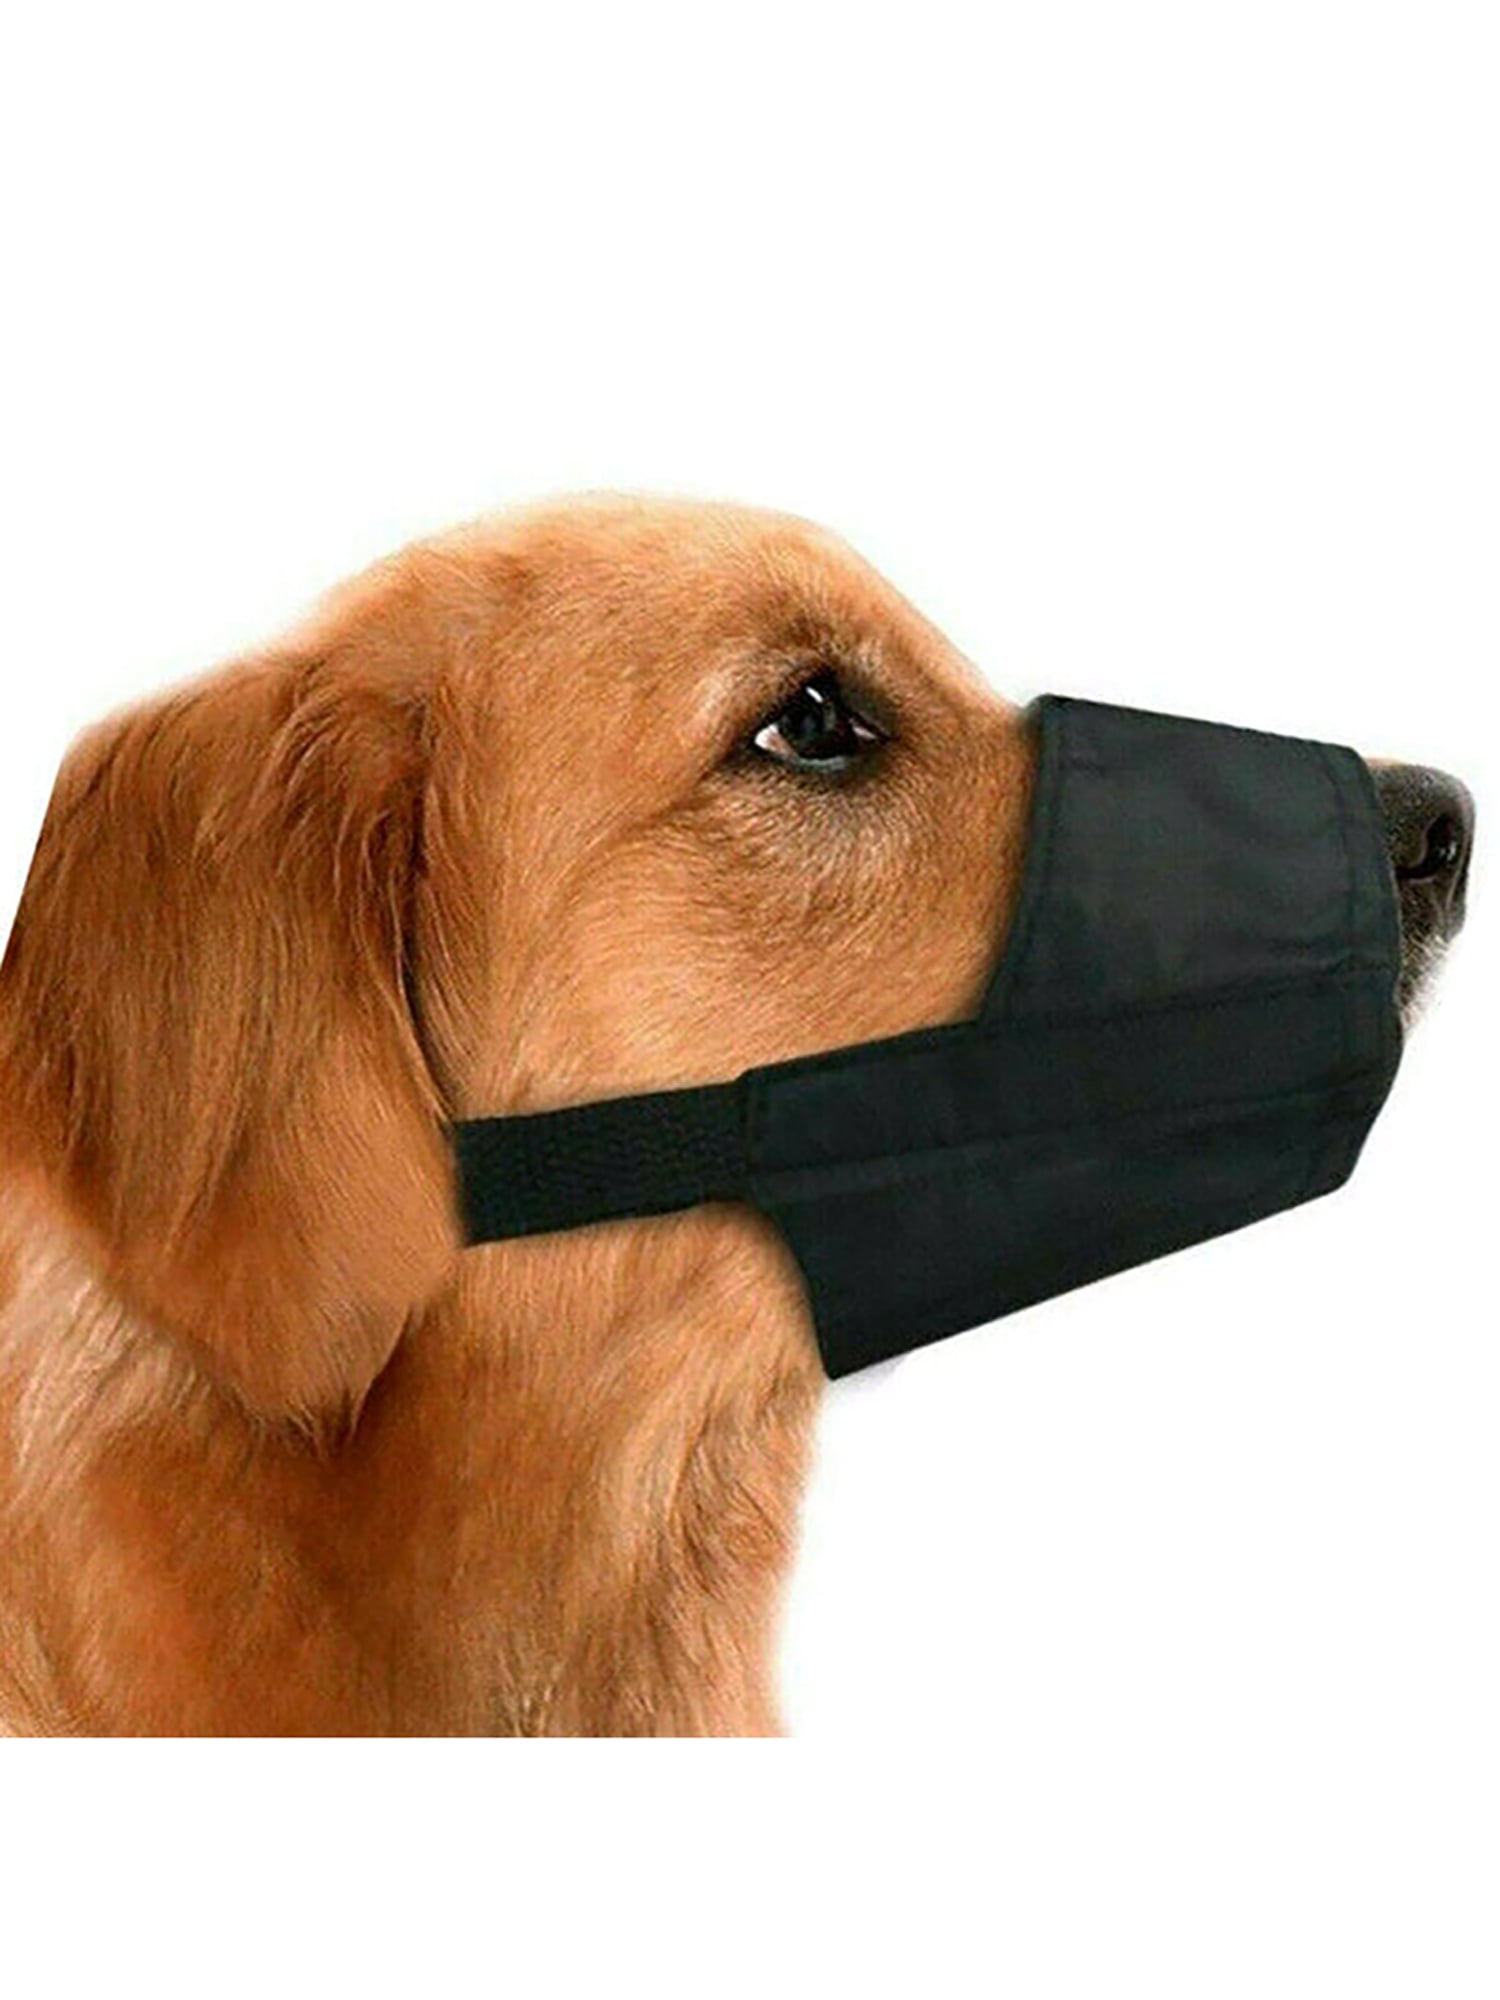 dog muzzle for chewing